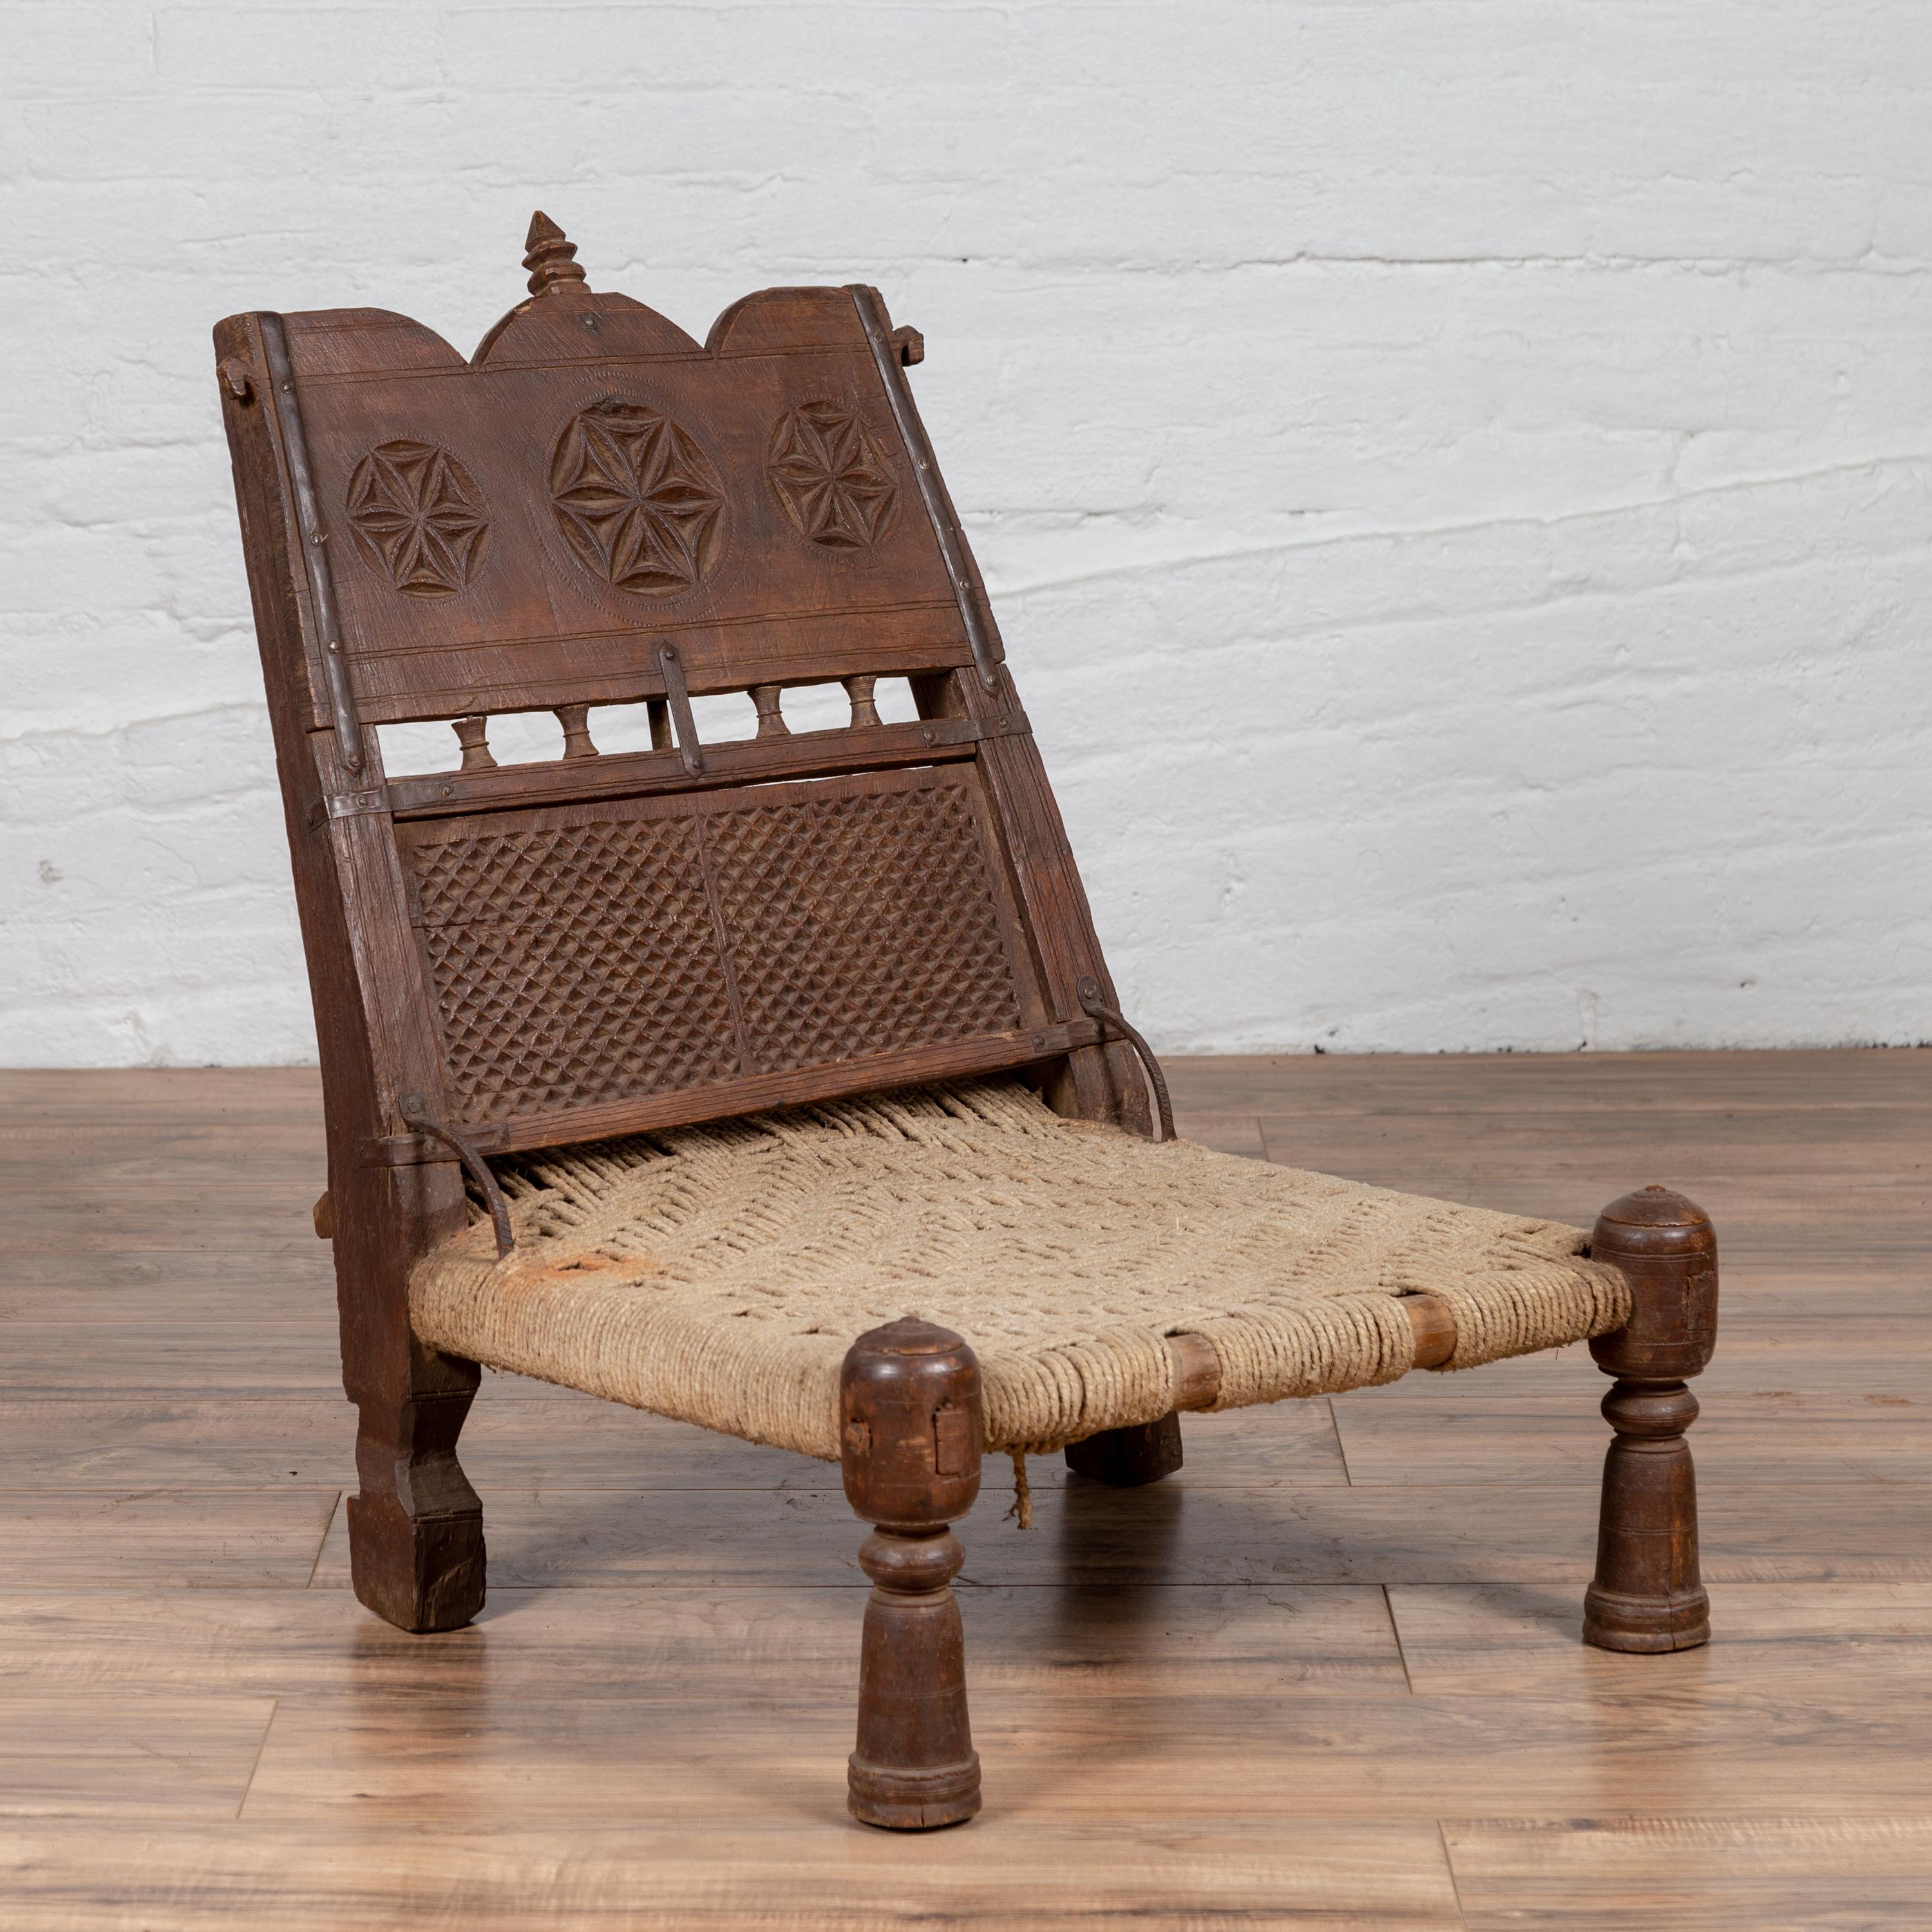 An old Indian rustic wooden low chair from the early 20th century, with hand-woven twine and carved motifs. Charming with its rustic appearance, this early 20th-century Indian low wooden chair is a delightful fusion of craftsmanship and